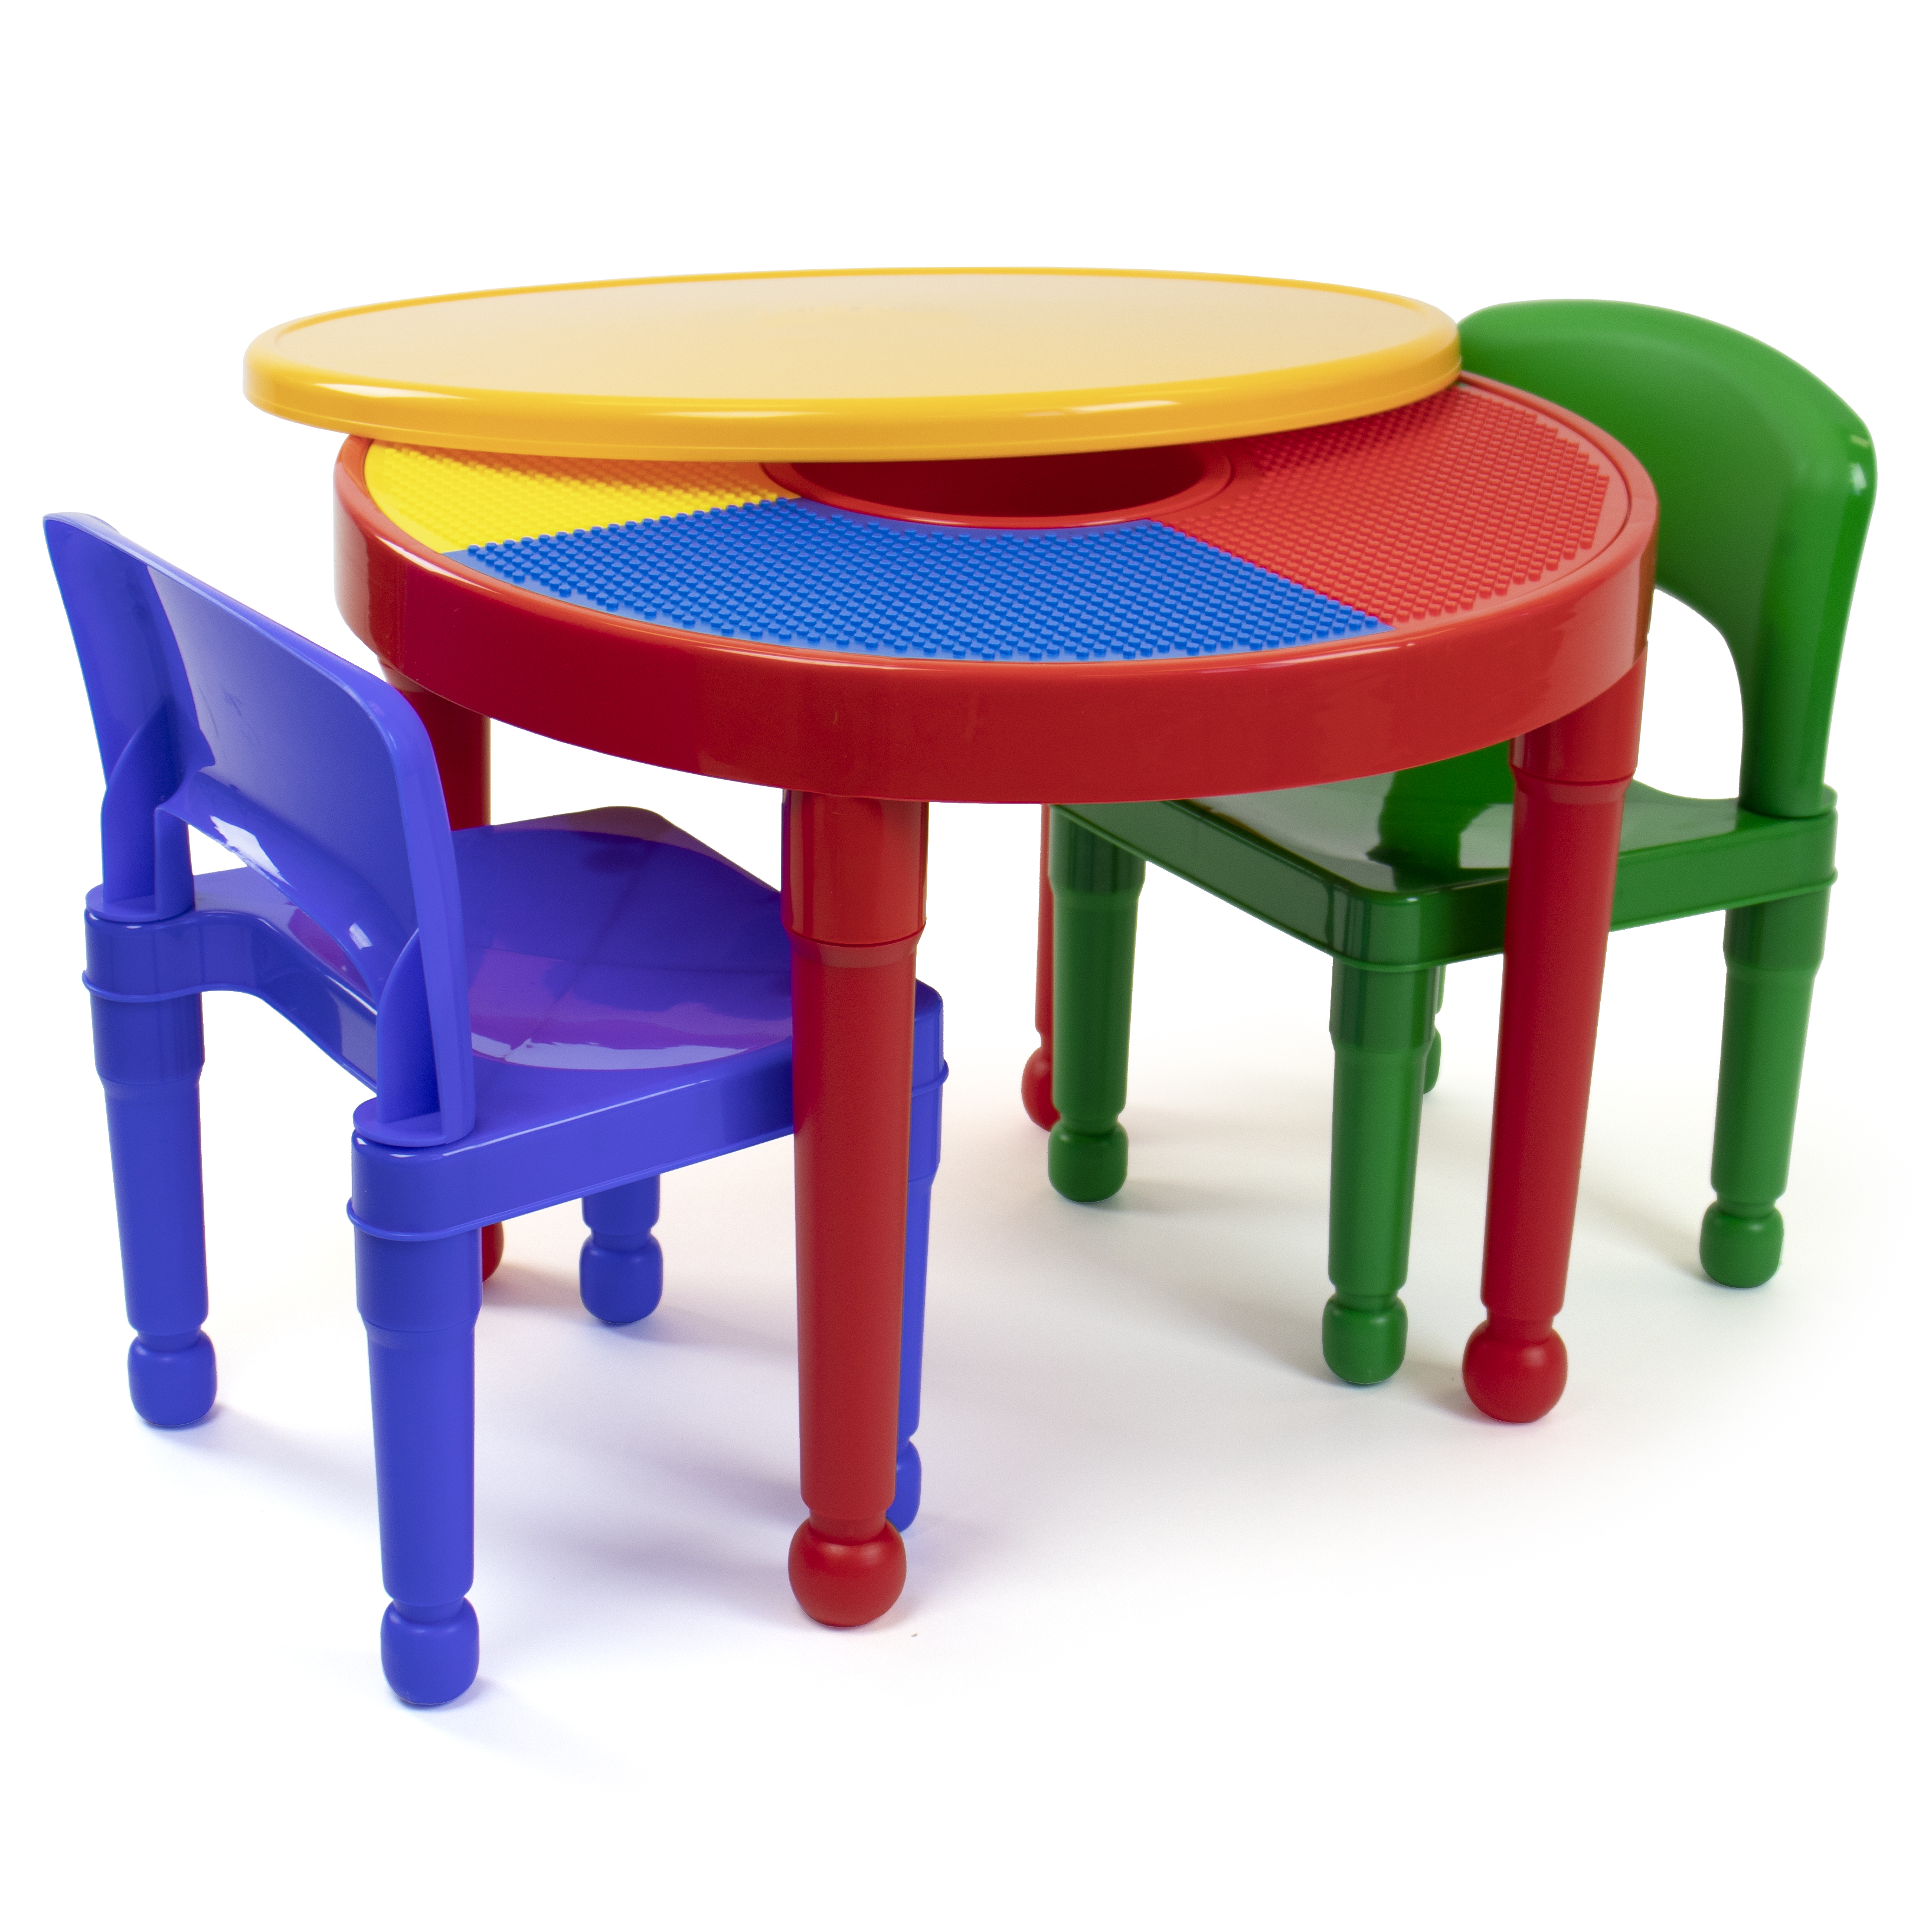 Humble Crew Kids 2-in-1 Plastic Dry Erase and Activity Table and 2 Chairs Set, Red, Green & Blue - image 1 of 8